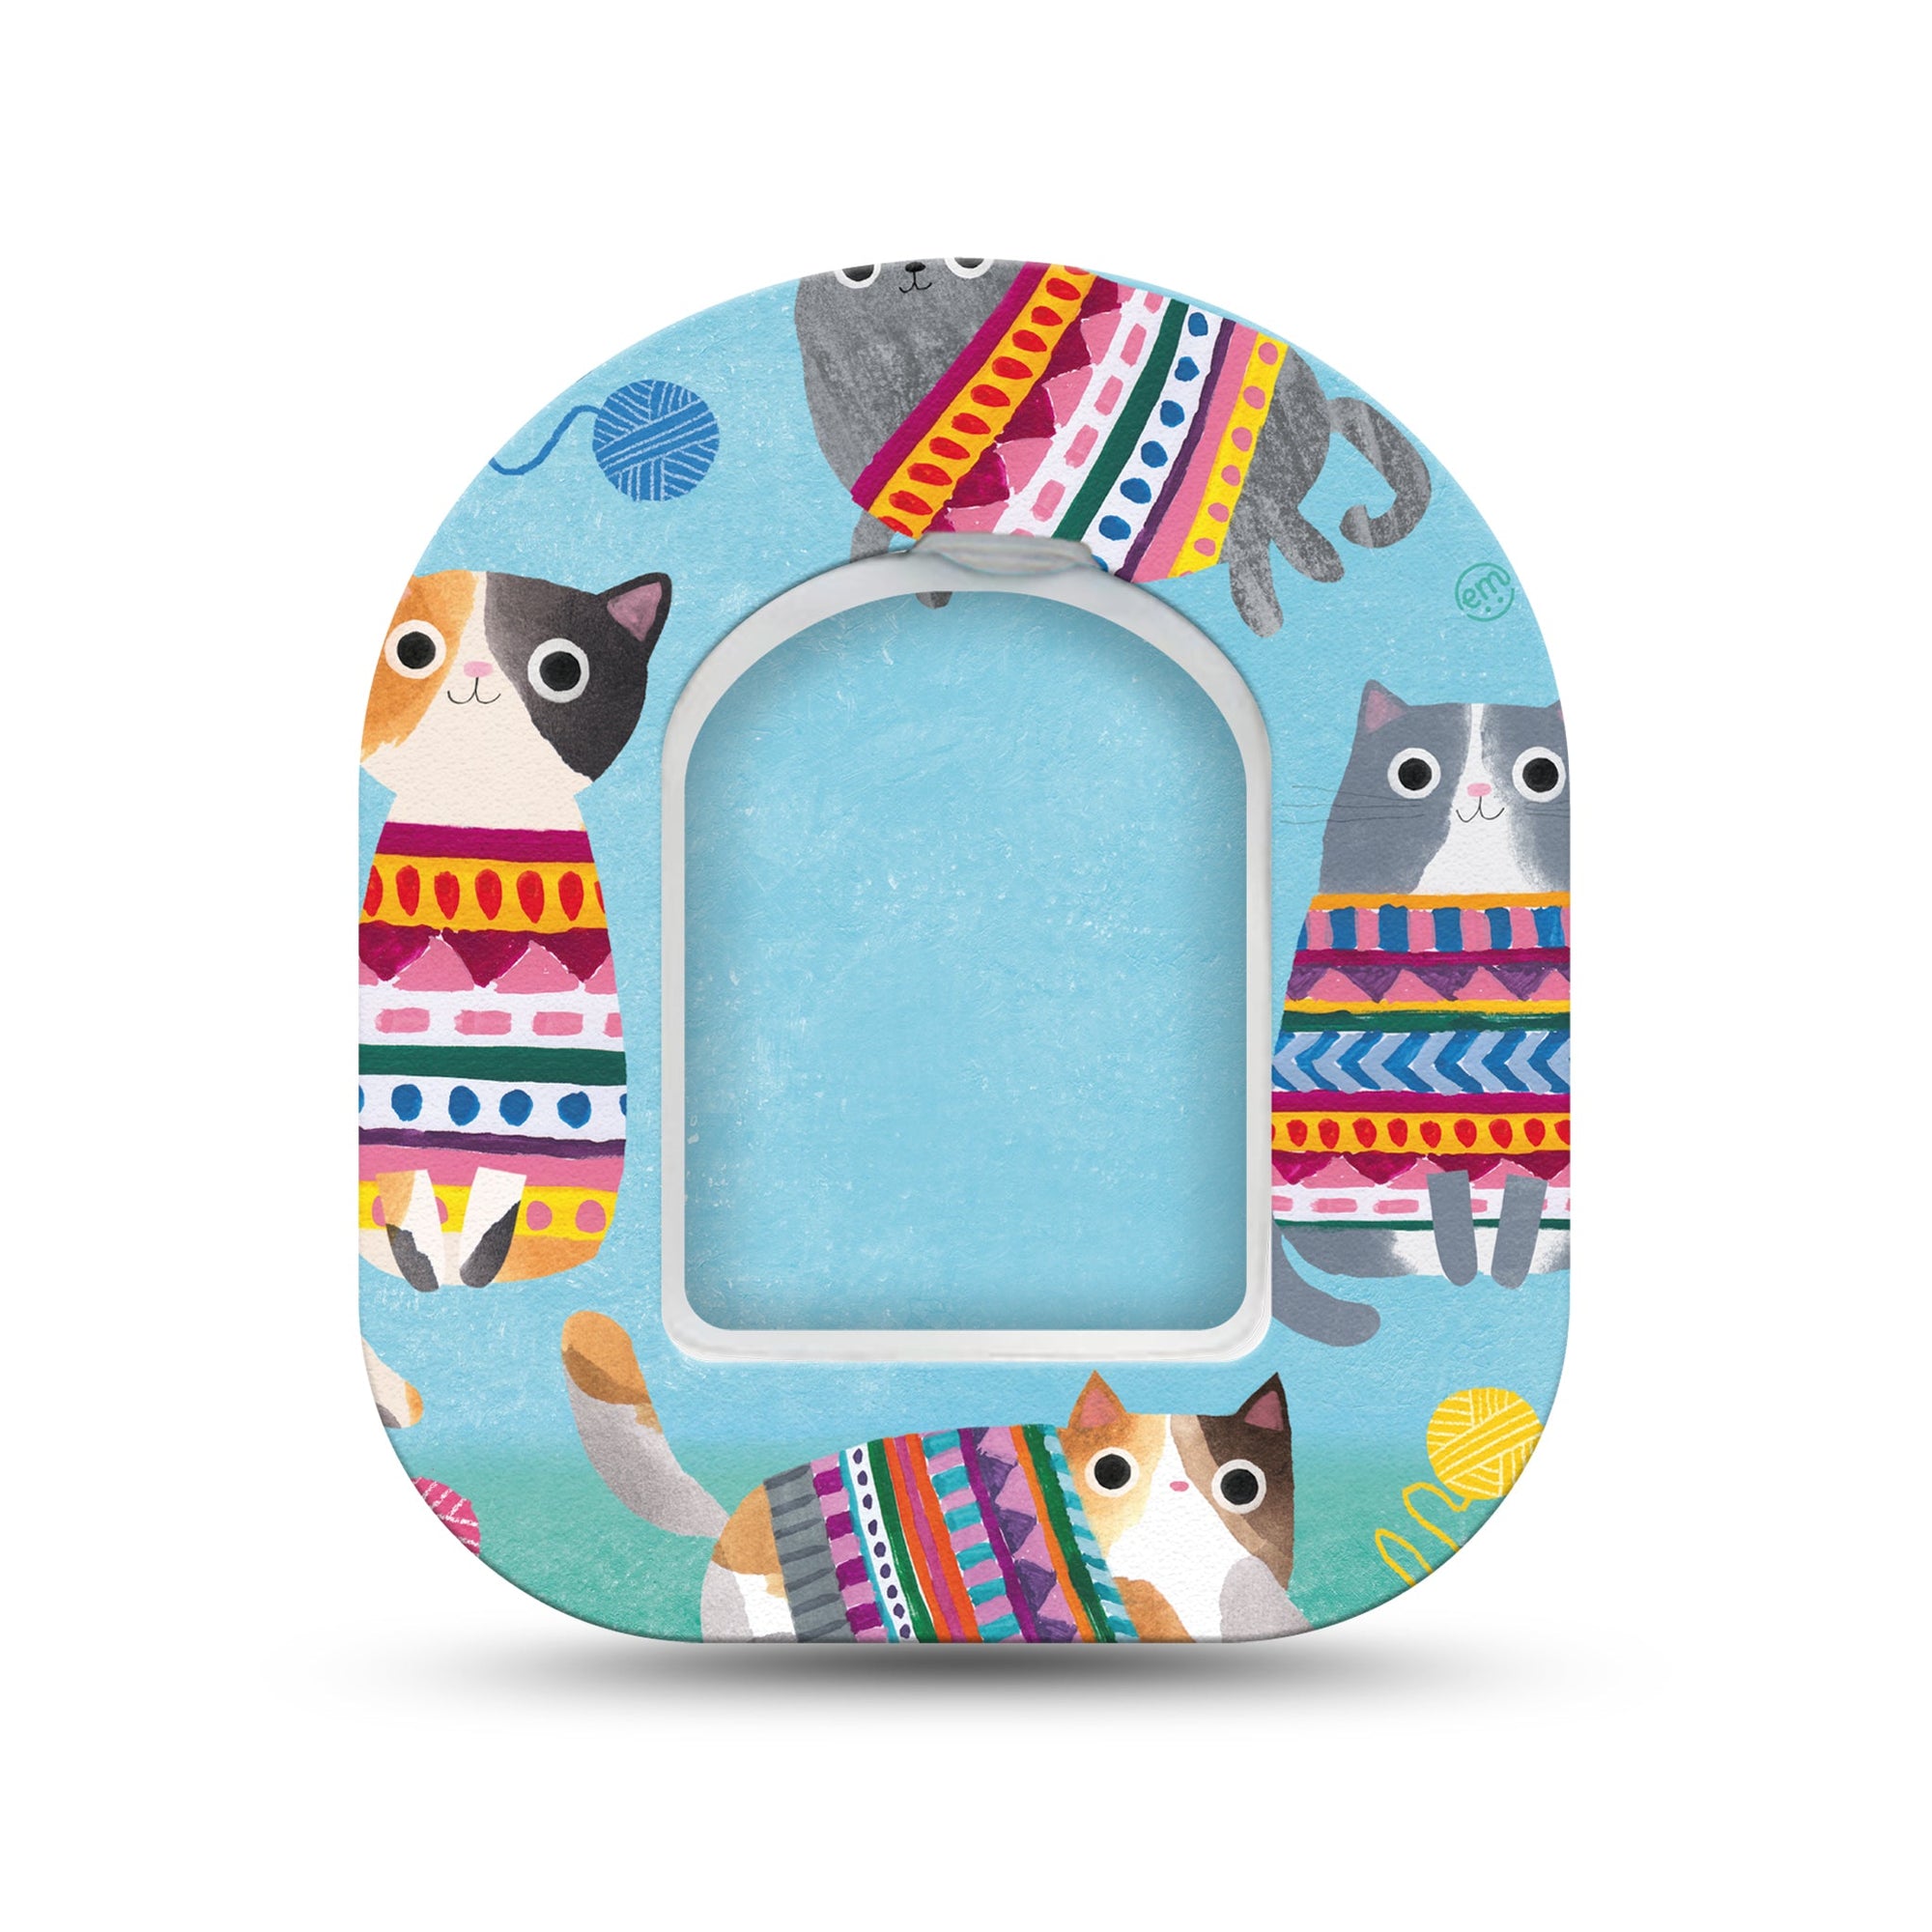 ExpressionMed Sweater Cats Pod Mini Tape Single Sticker and Single Tape, Cat in a Sweater Adhesive Tape Pump Design